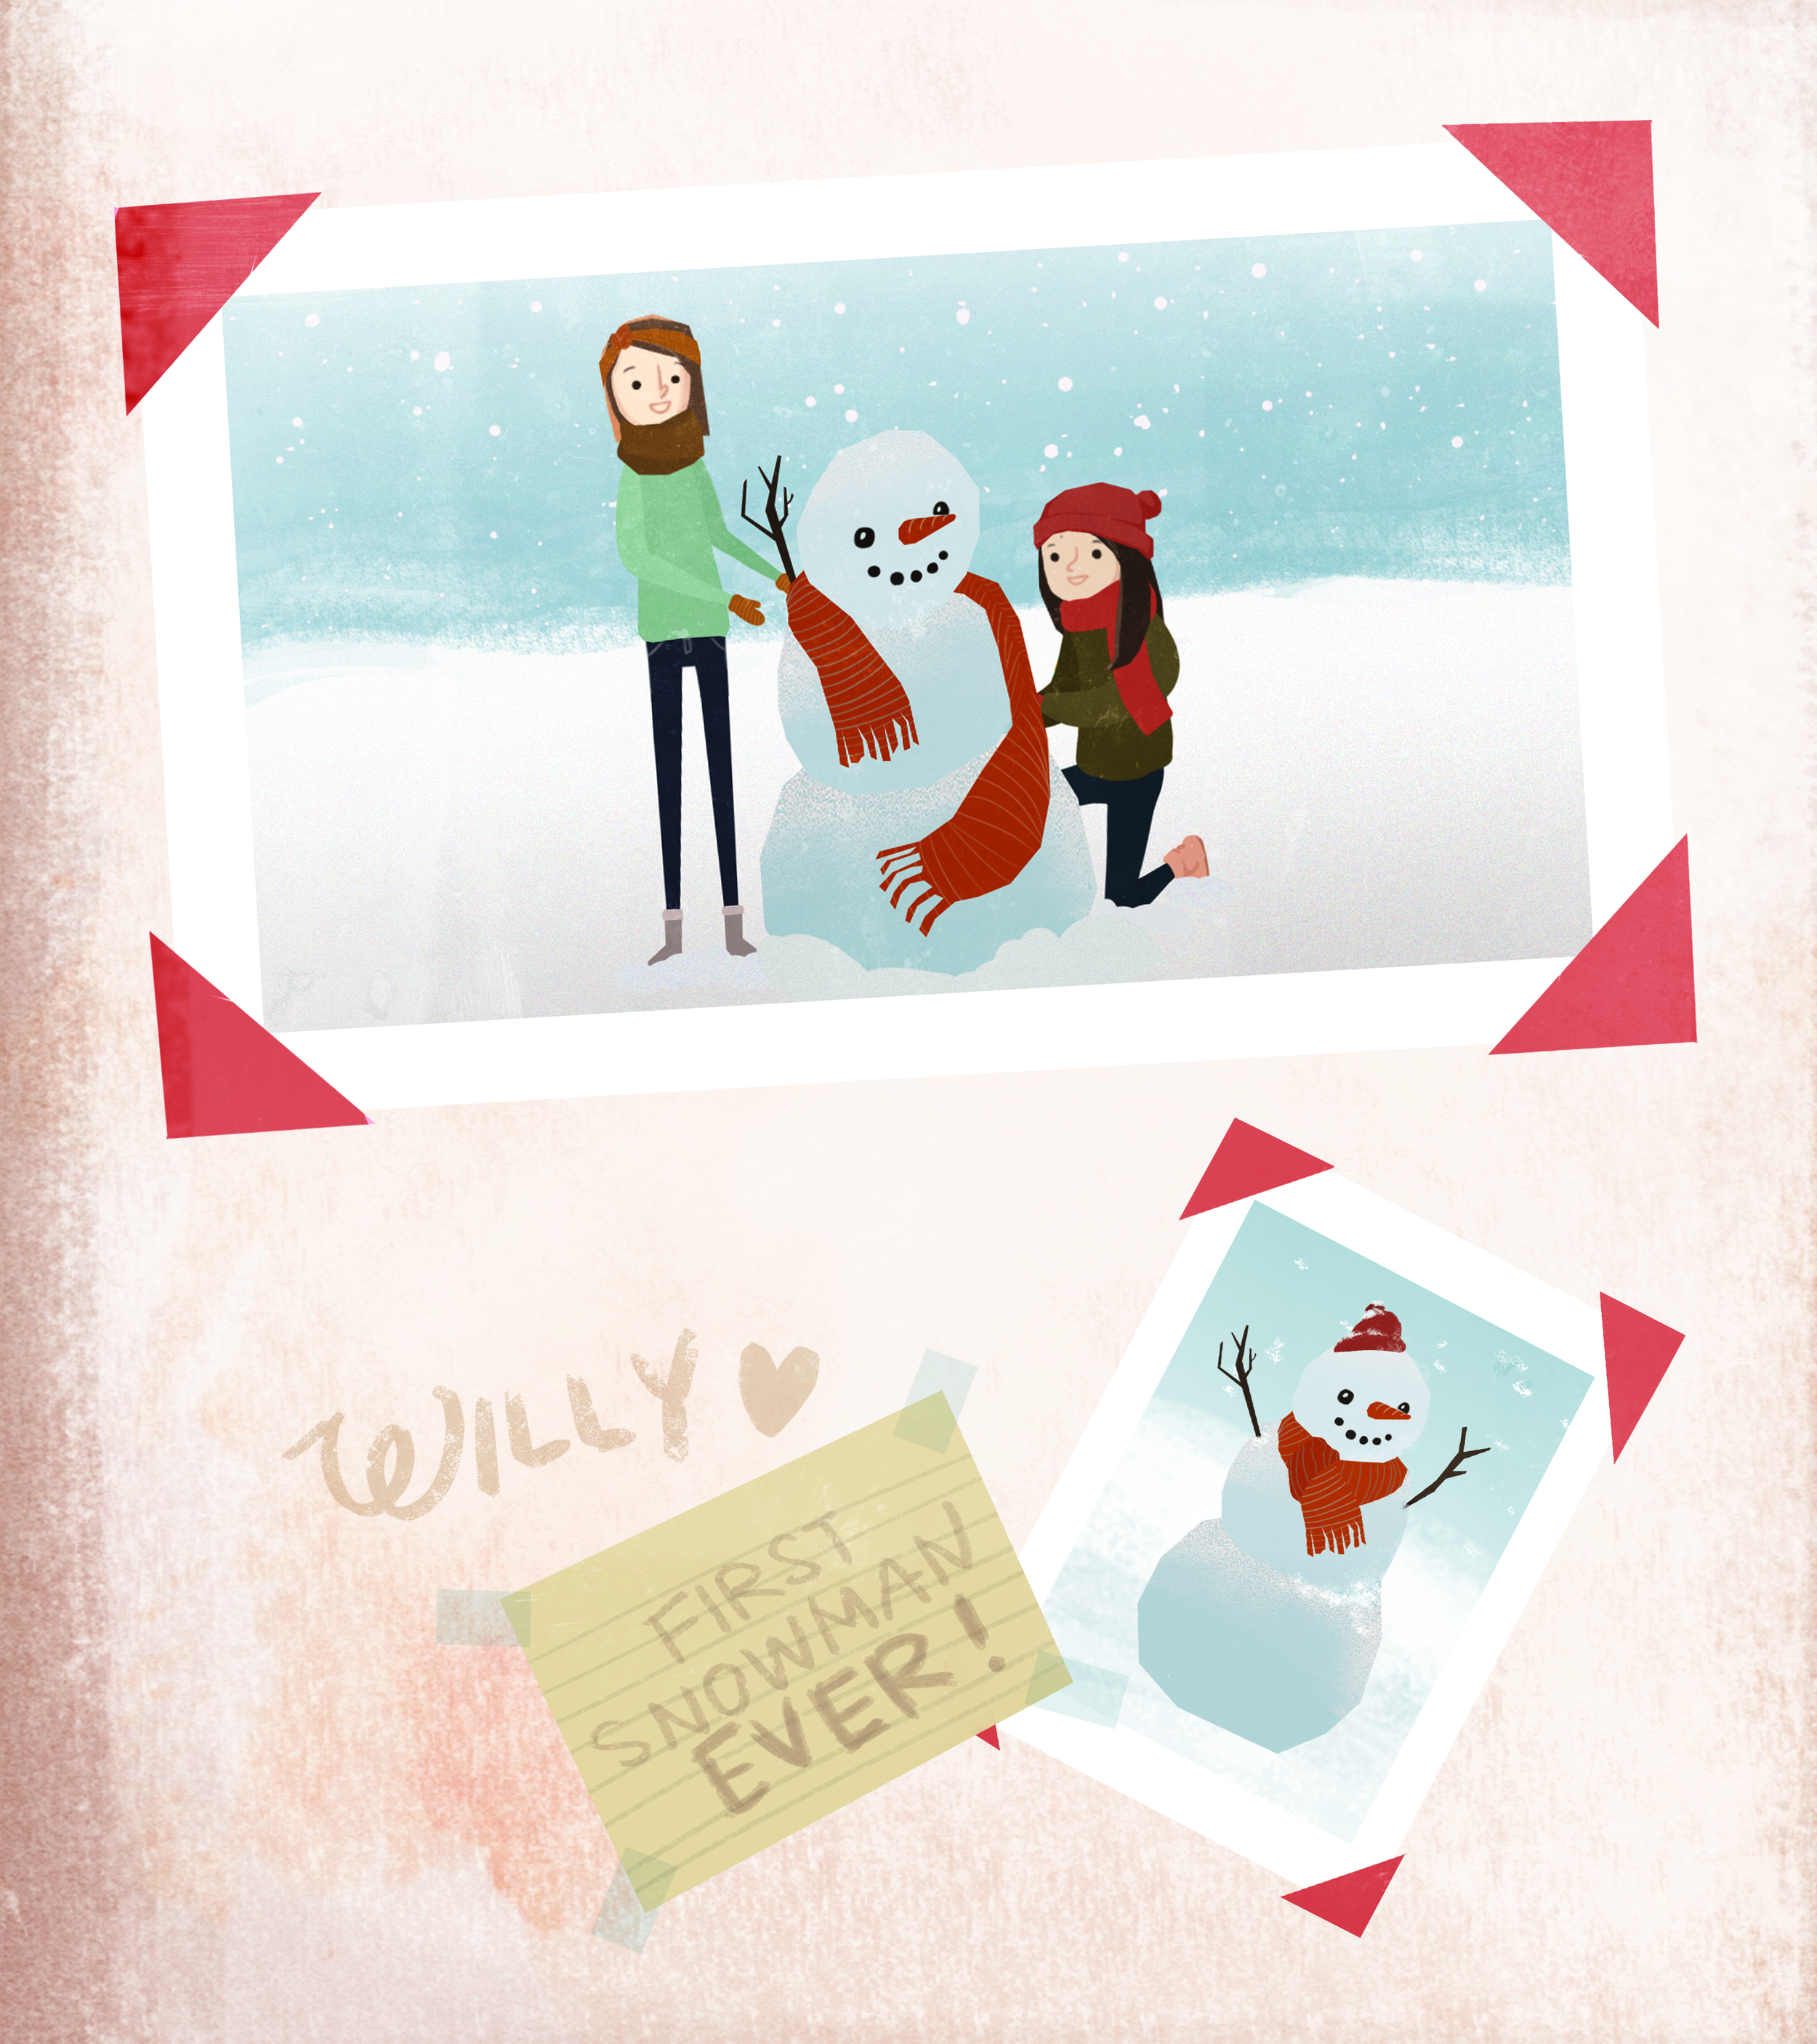 TBL_Book_PageTwo_Snowman_v01.png